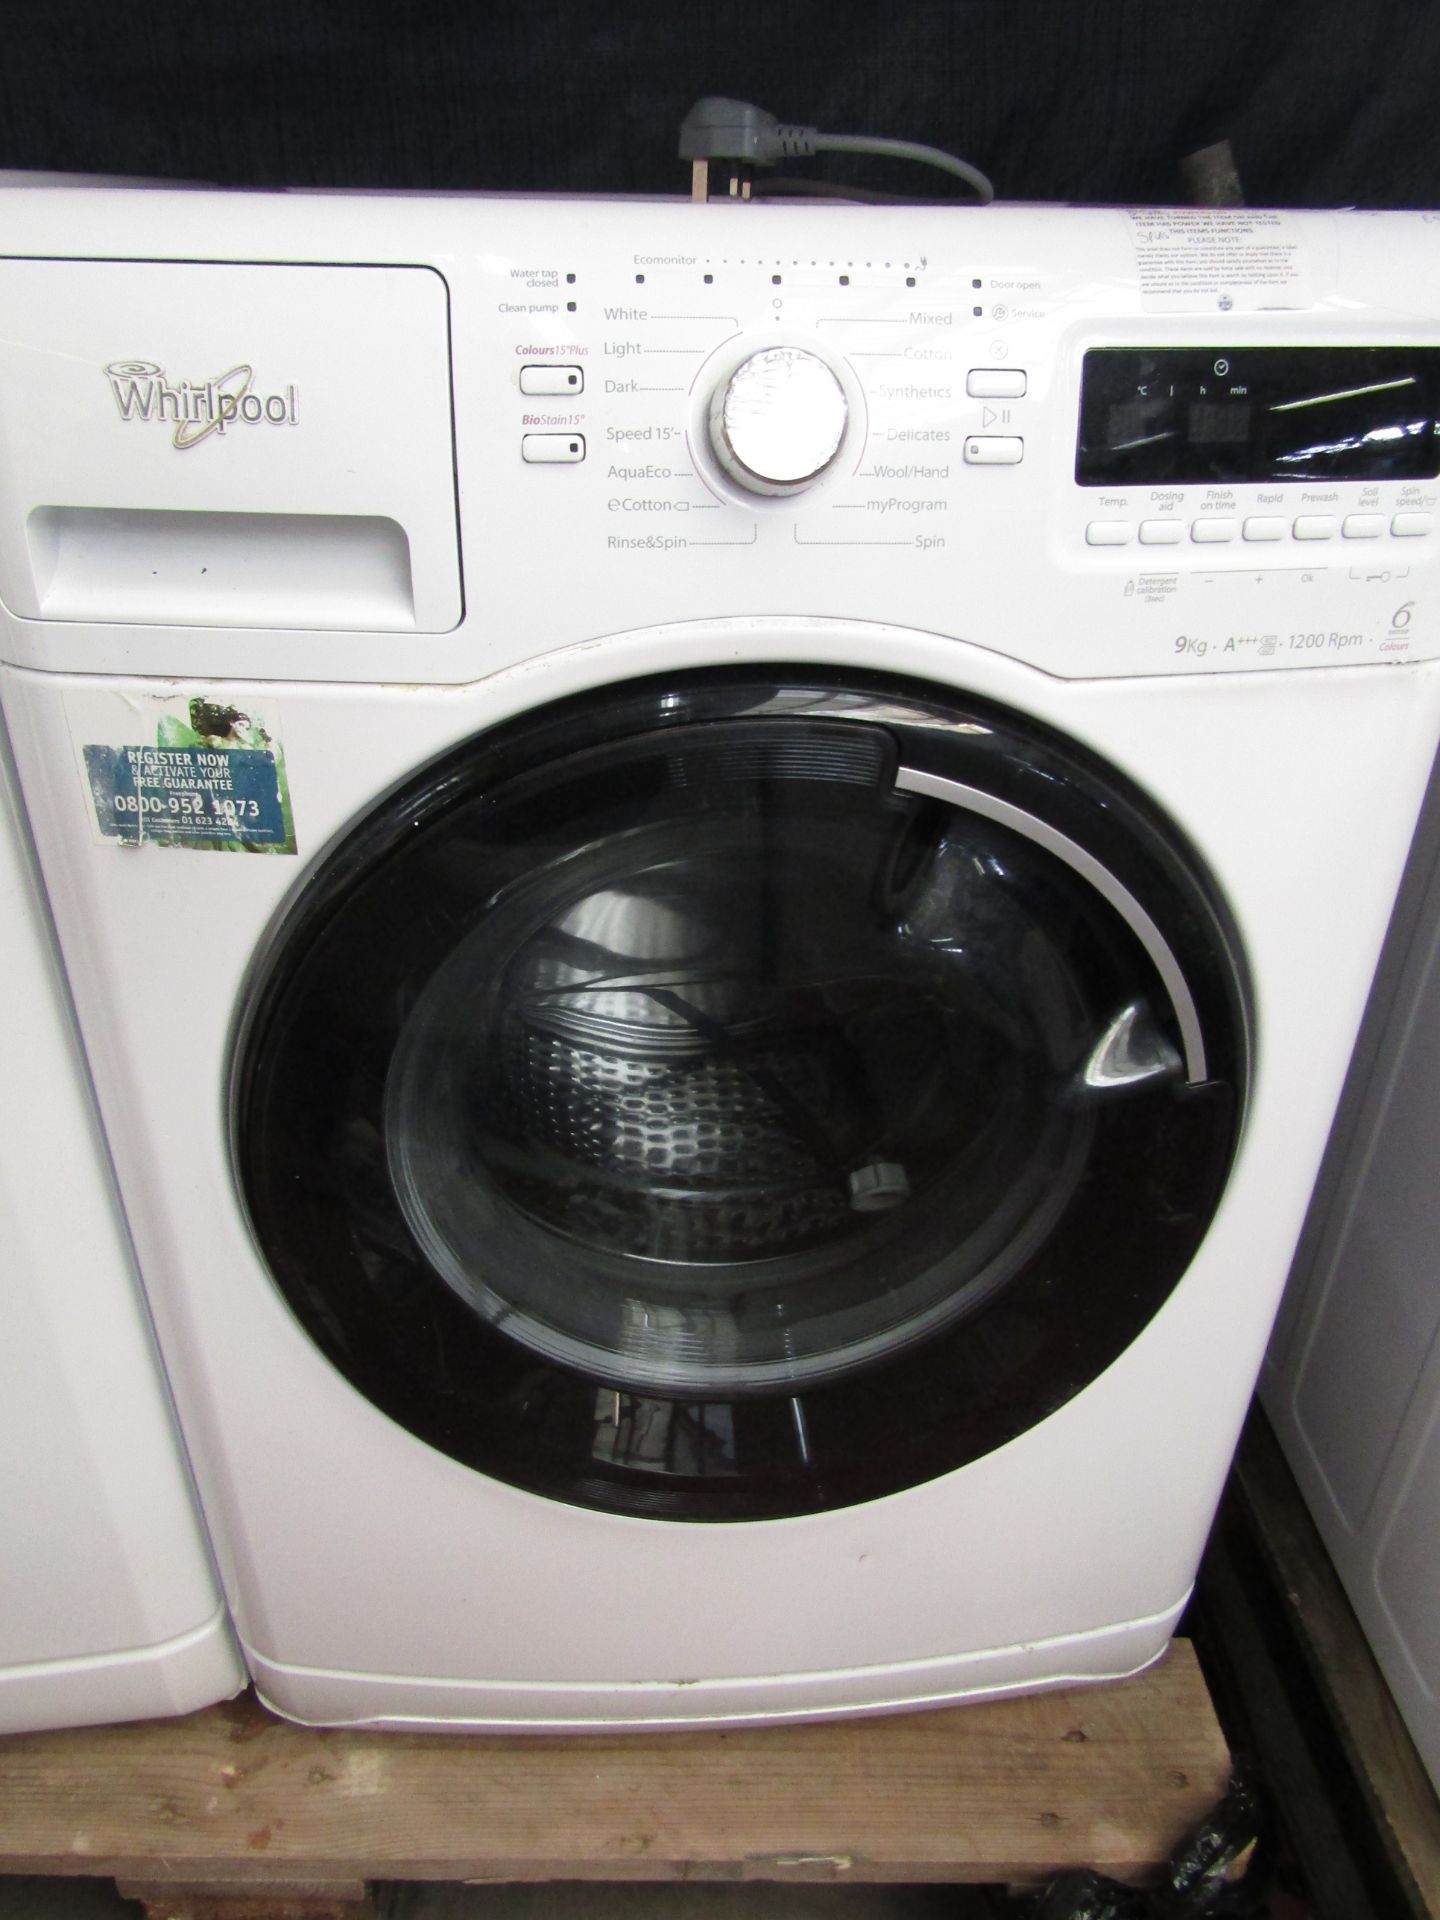 Whirlpool 6th sense 9Kg washing machine, Powers on and spins but then displays error code E5